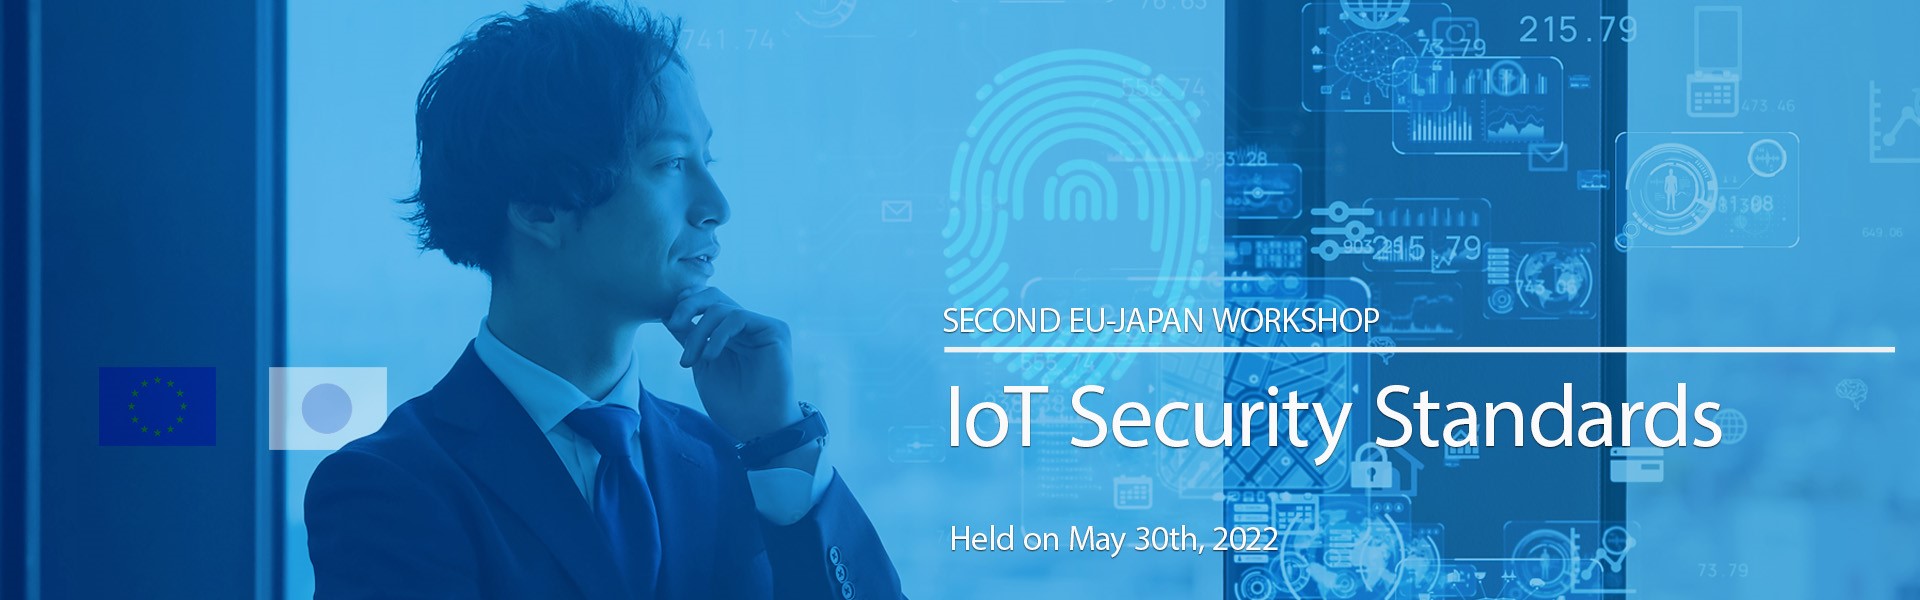 EU AND JAPAN POLICYMAKERS AND TECHNOLOGY EXPERTS RECONVENED TO DISCUSS IOT SECURITY FRAMEWORKS